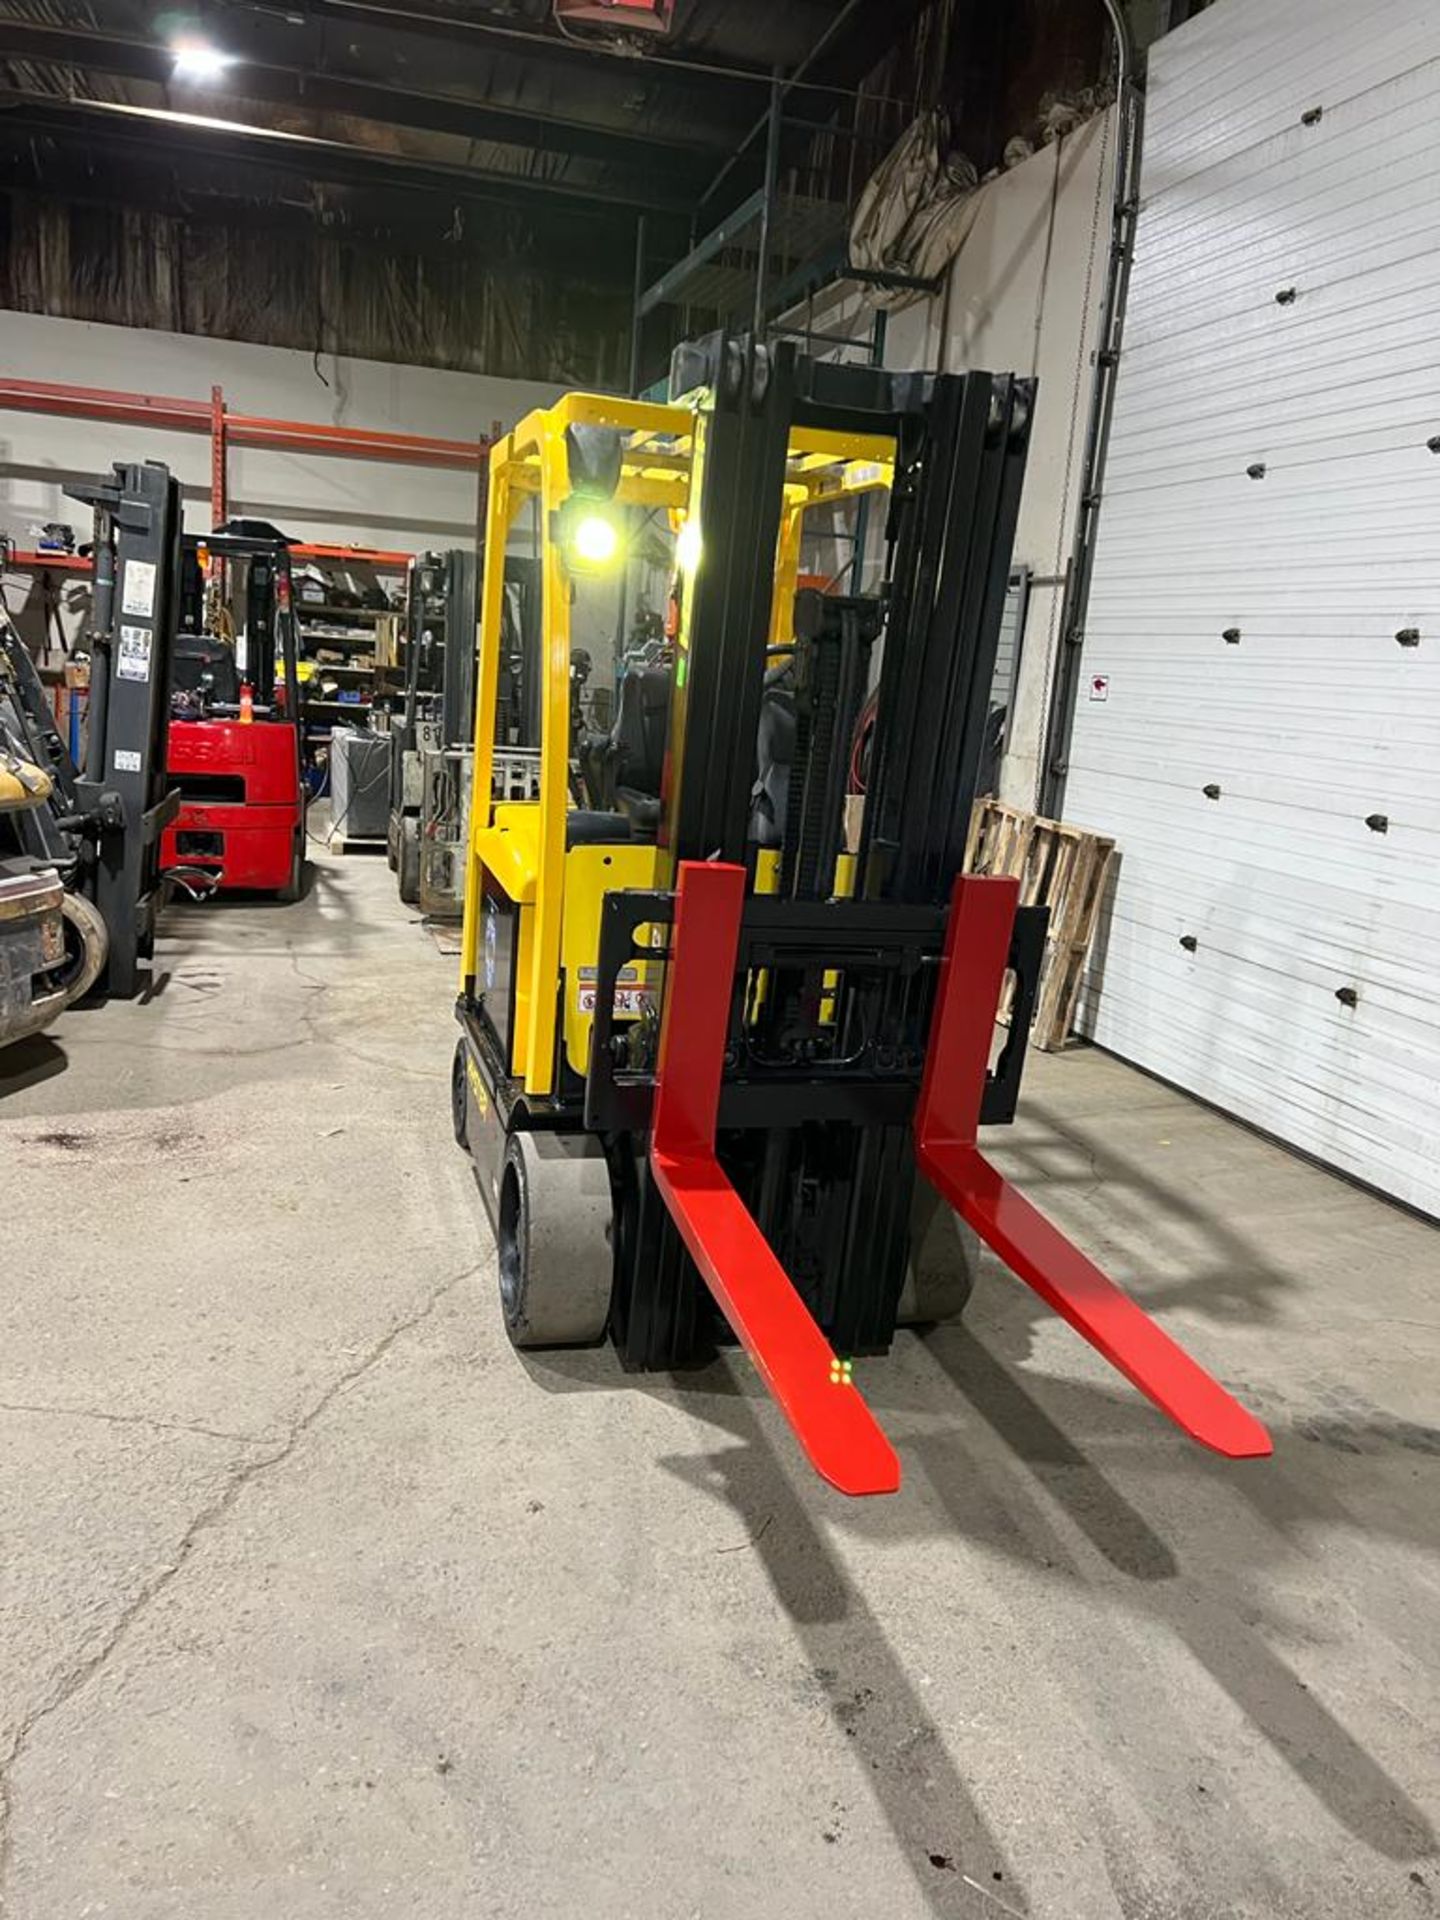 NICE 2016 Hyser 60 - 6,000lbs Capacity Electric Forklift 48V with Sideshift 48" forks - 3-stage mast - Image 2 of 4